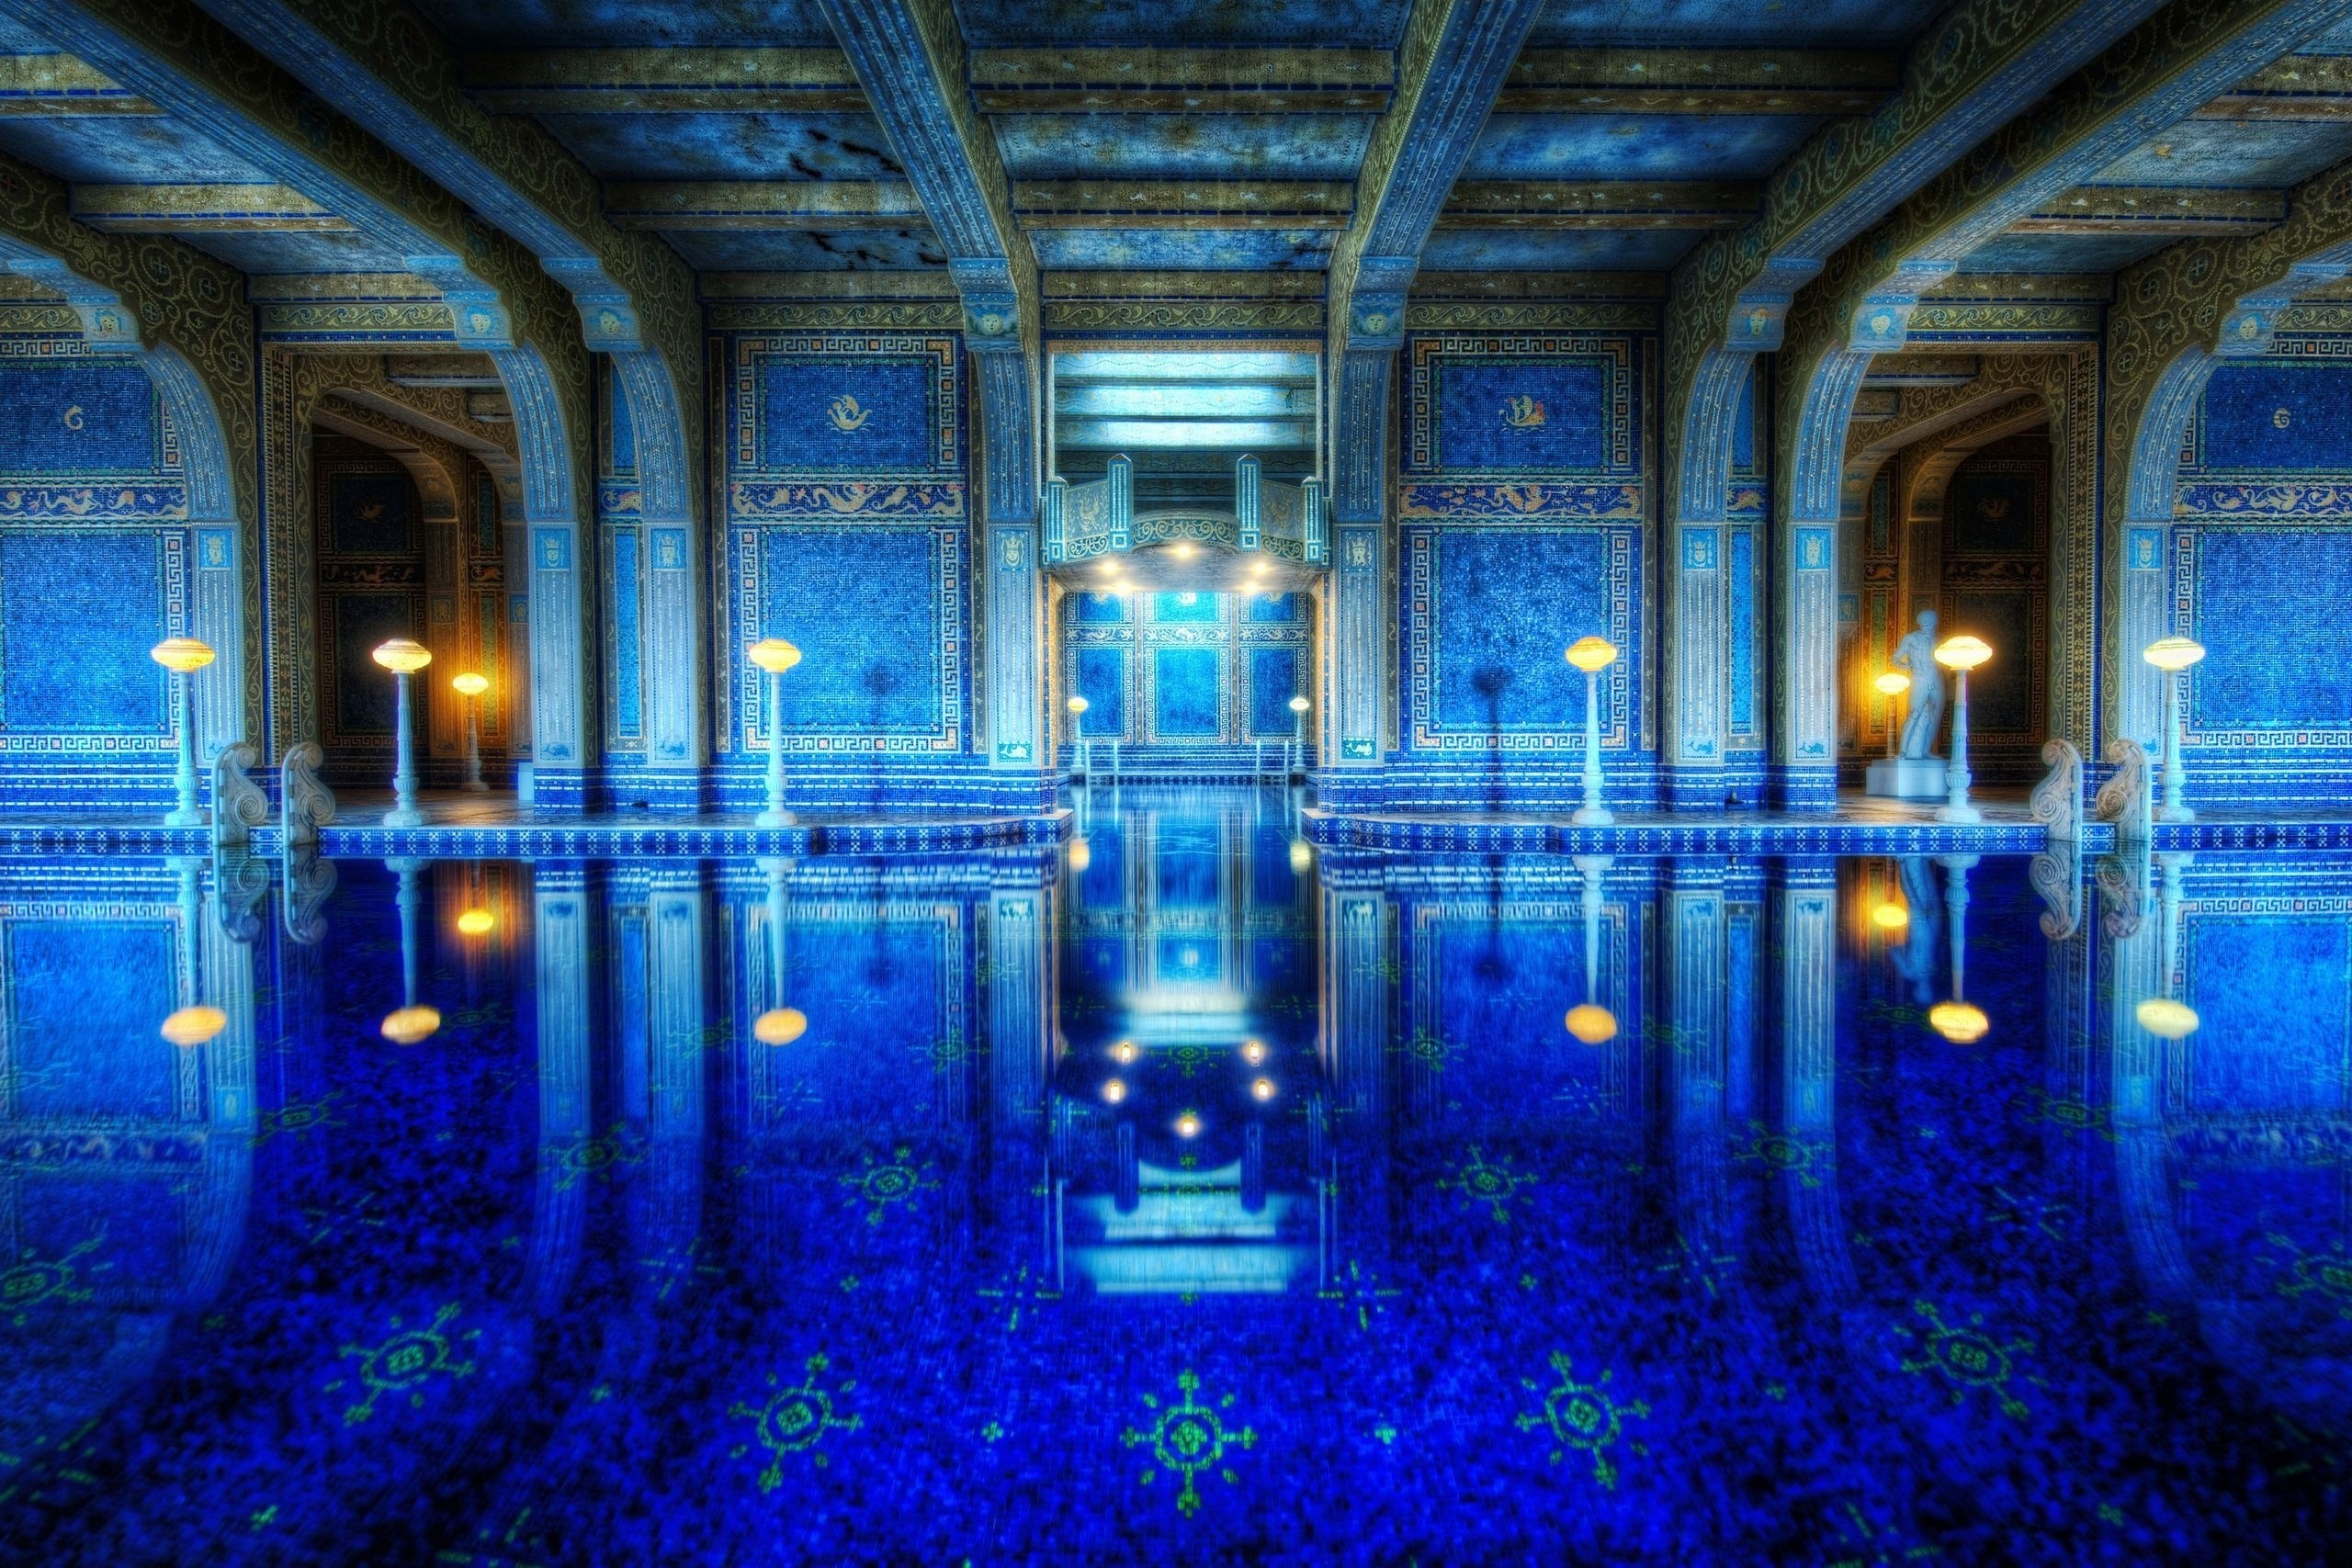 General 2560x1707 swimming pool indoors water reflection